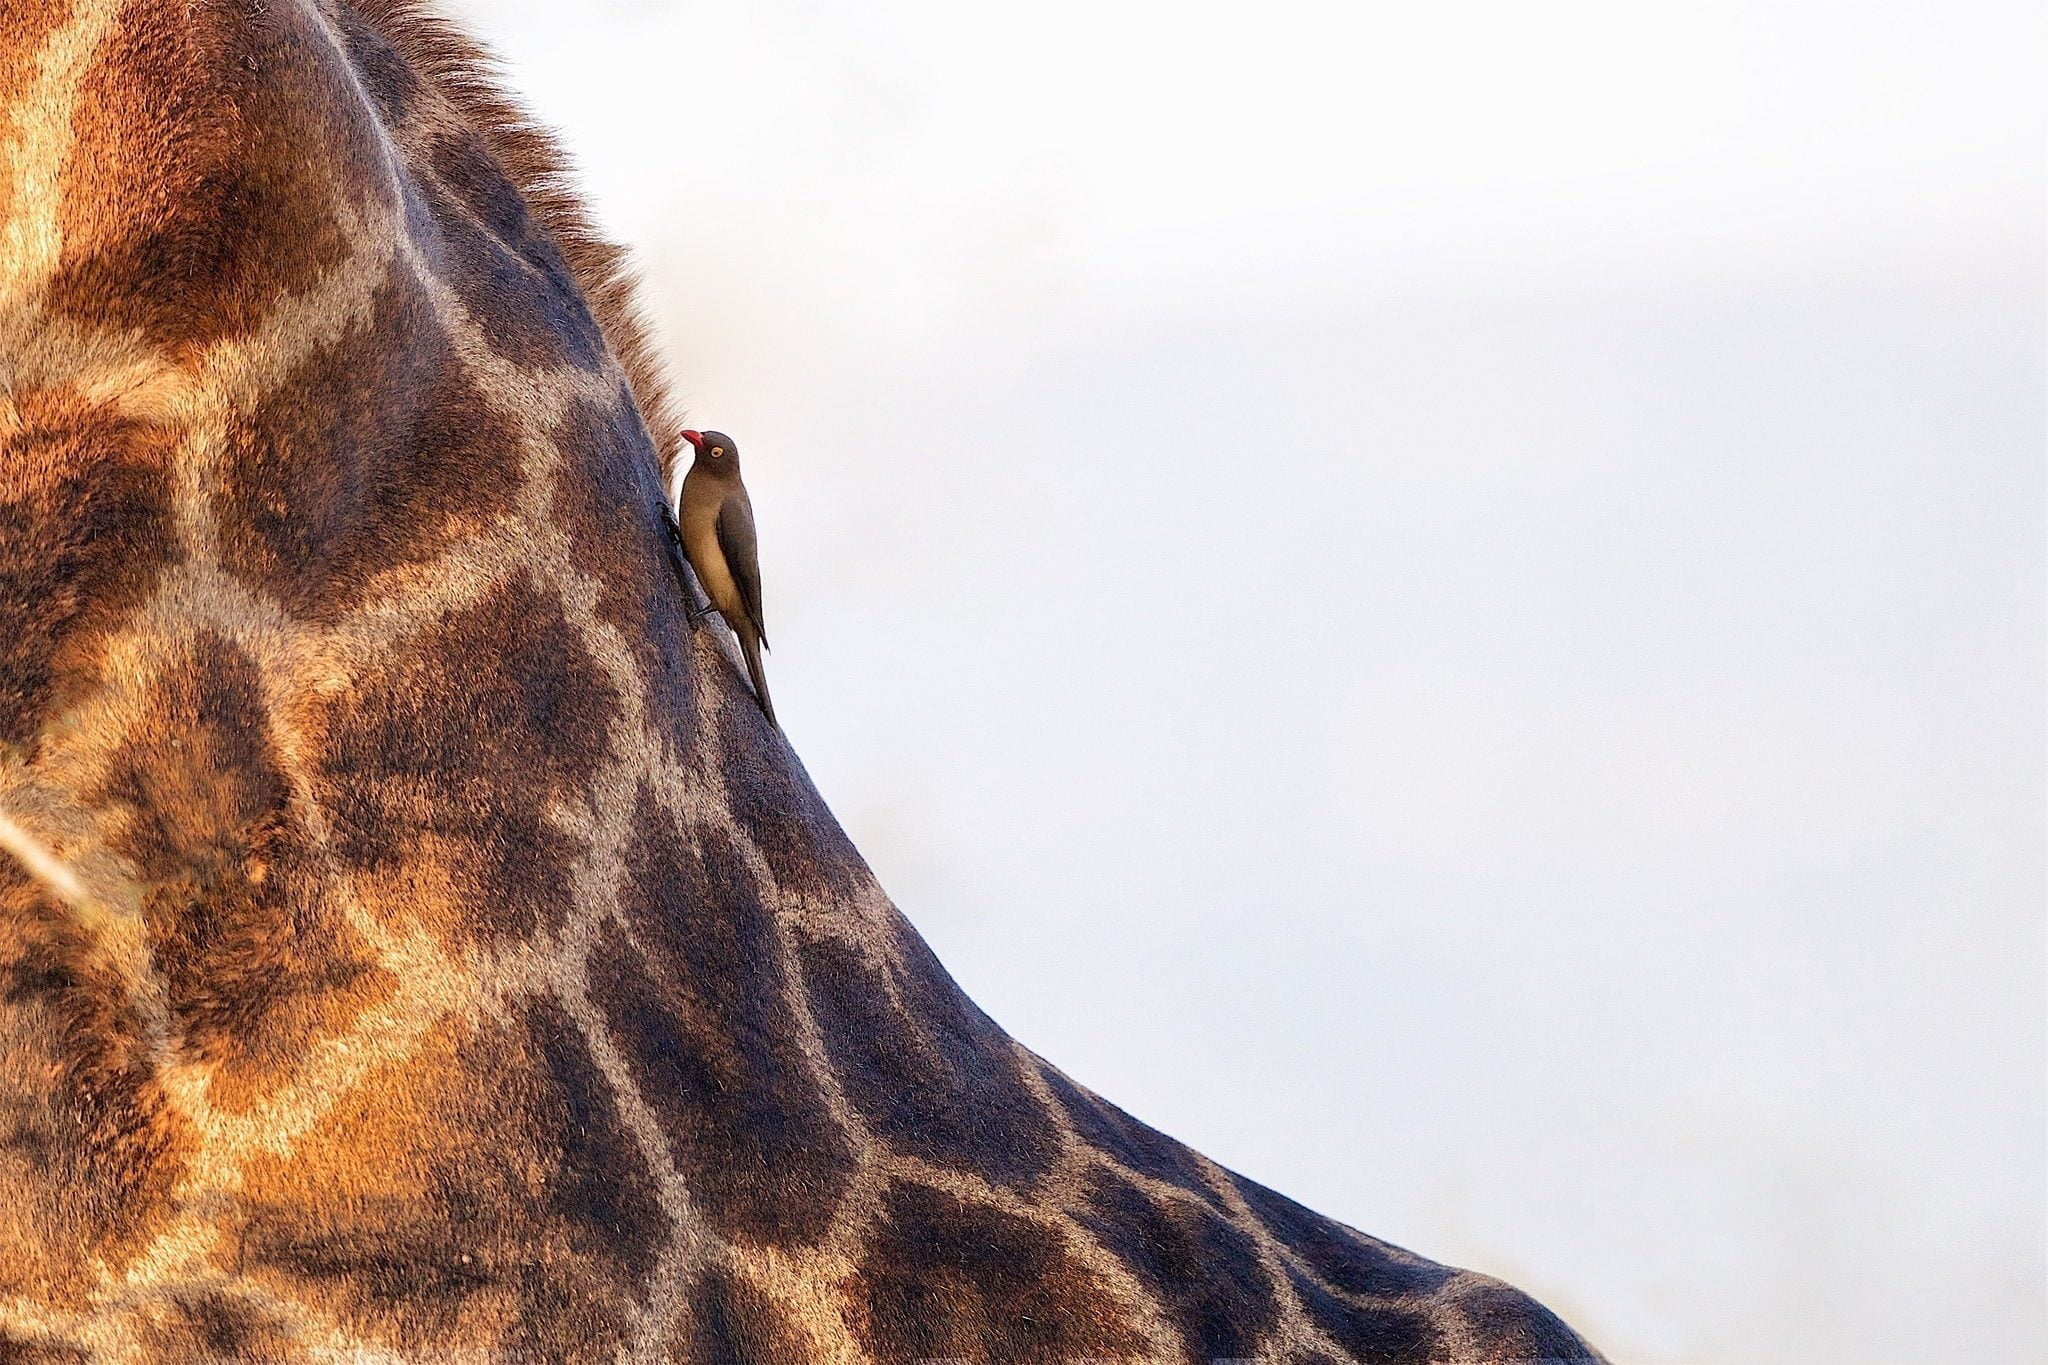 An Oxpecker sat on a the neck of a giraffe photographed during the NaturesLens African Wildlife of Zimanga photography holiday